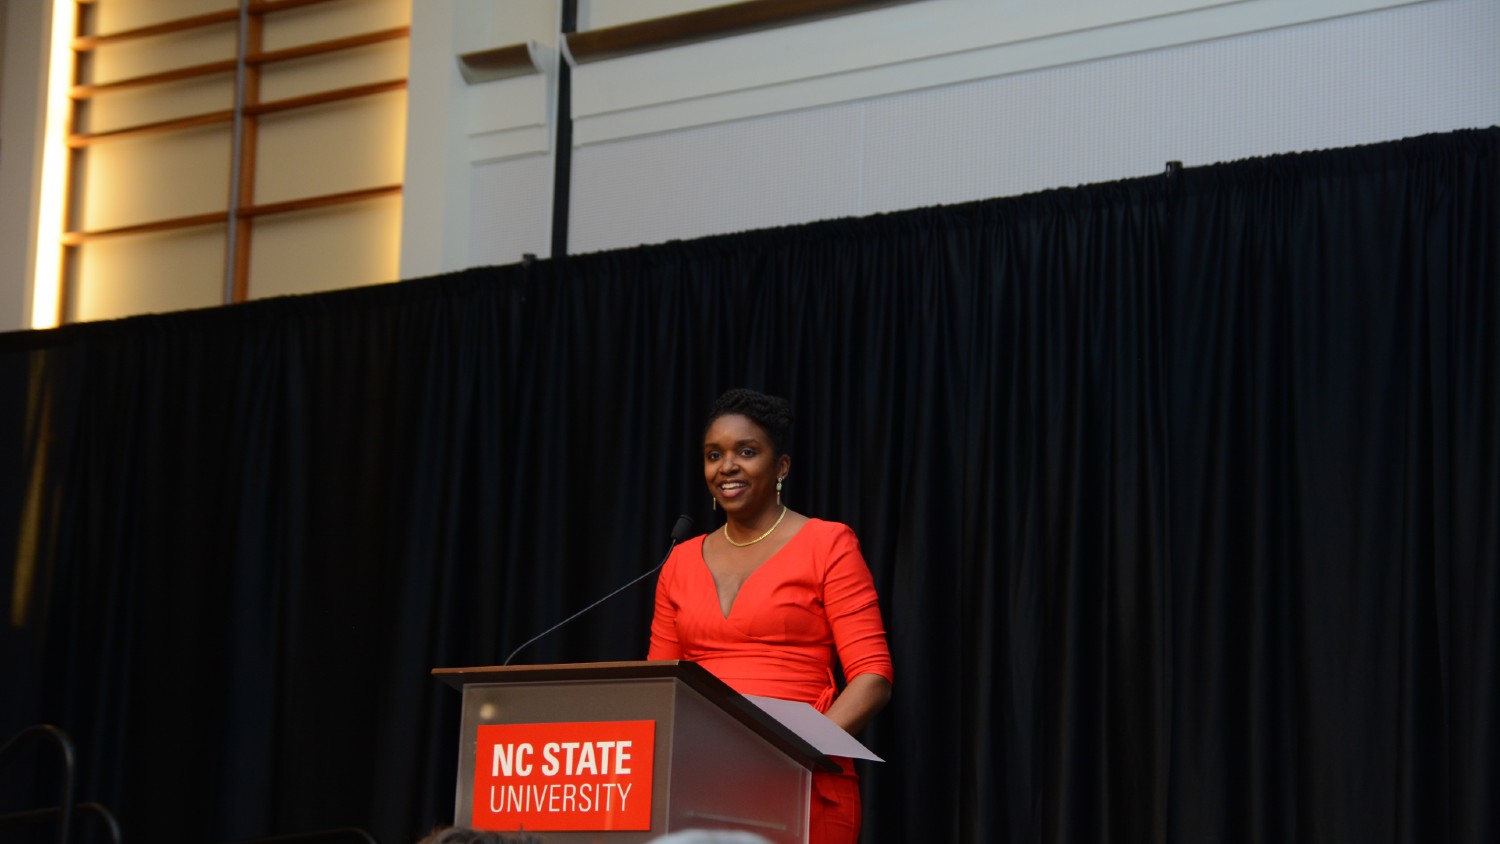 Domonique Carter, pictured here, delivered remarks as the annual Sisterhood Dinner in February 2023.